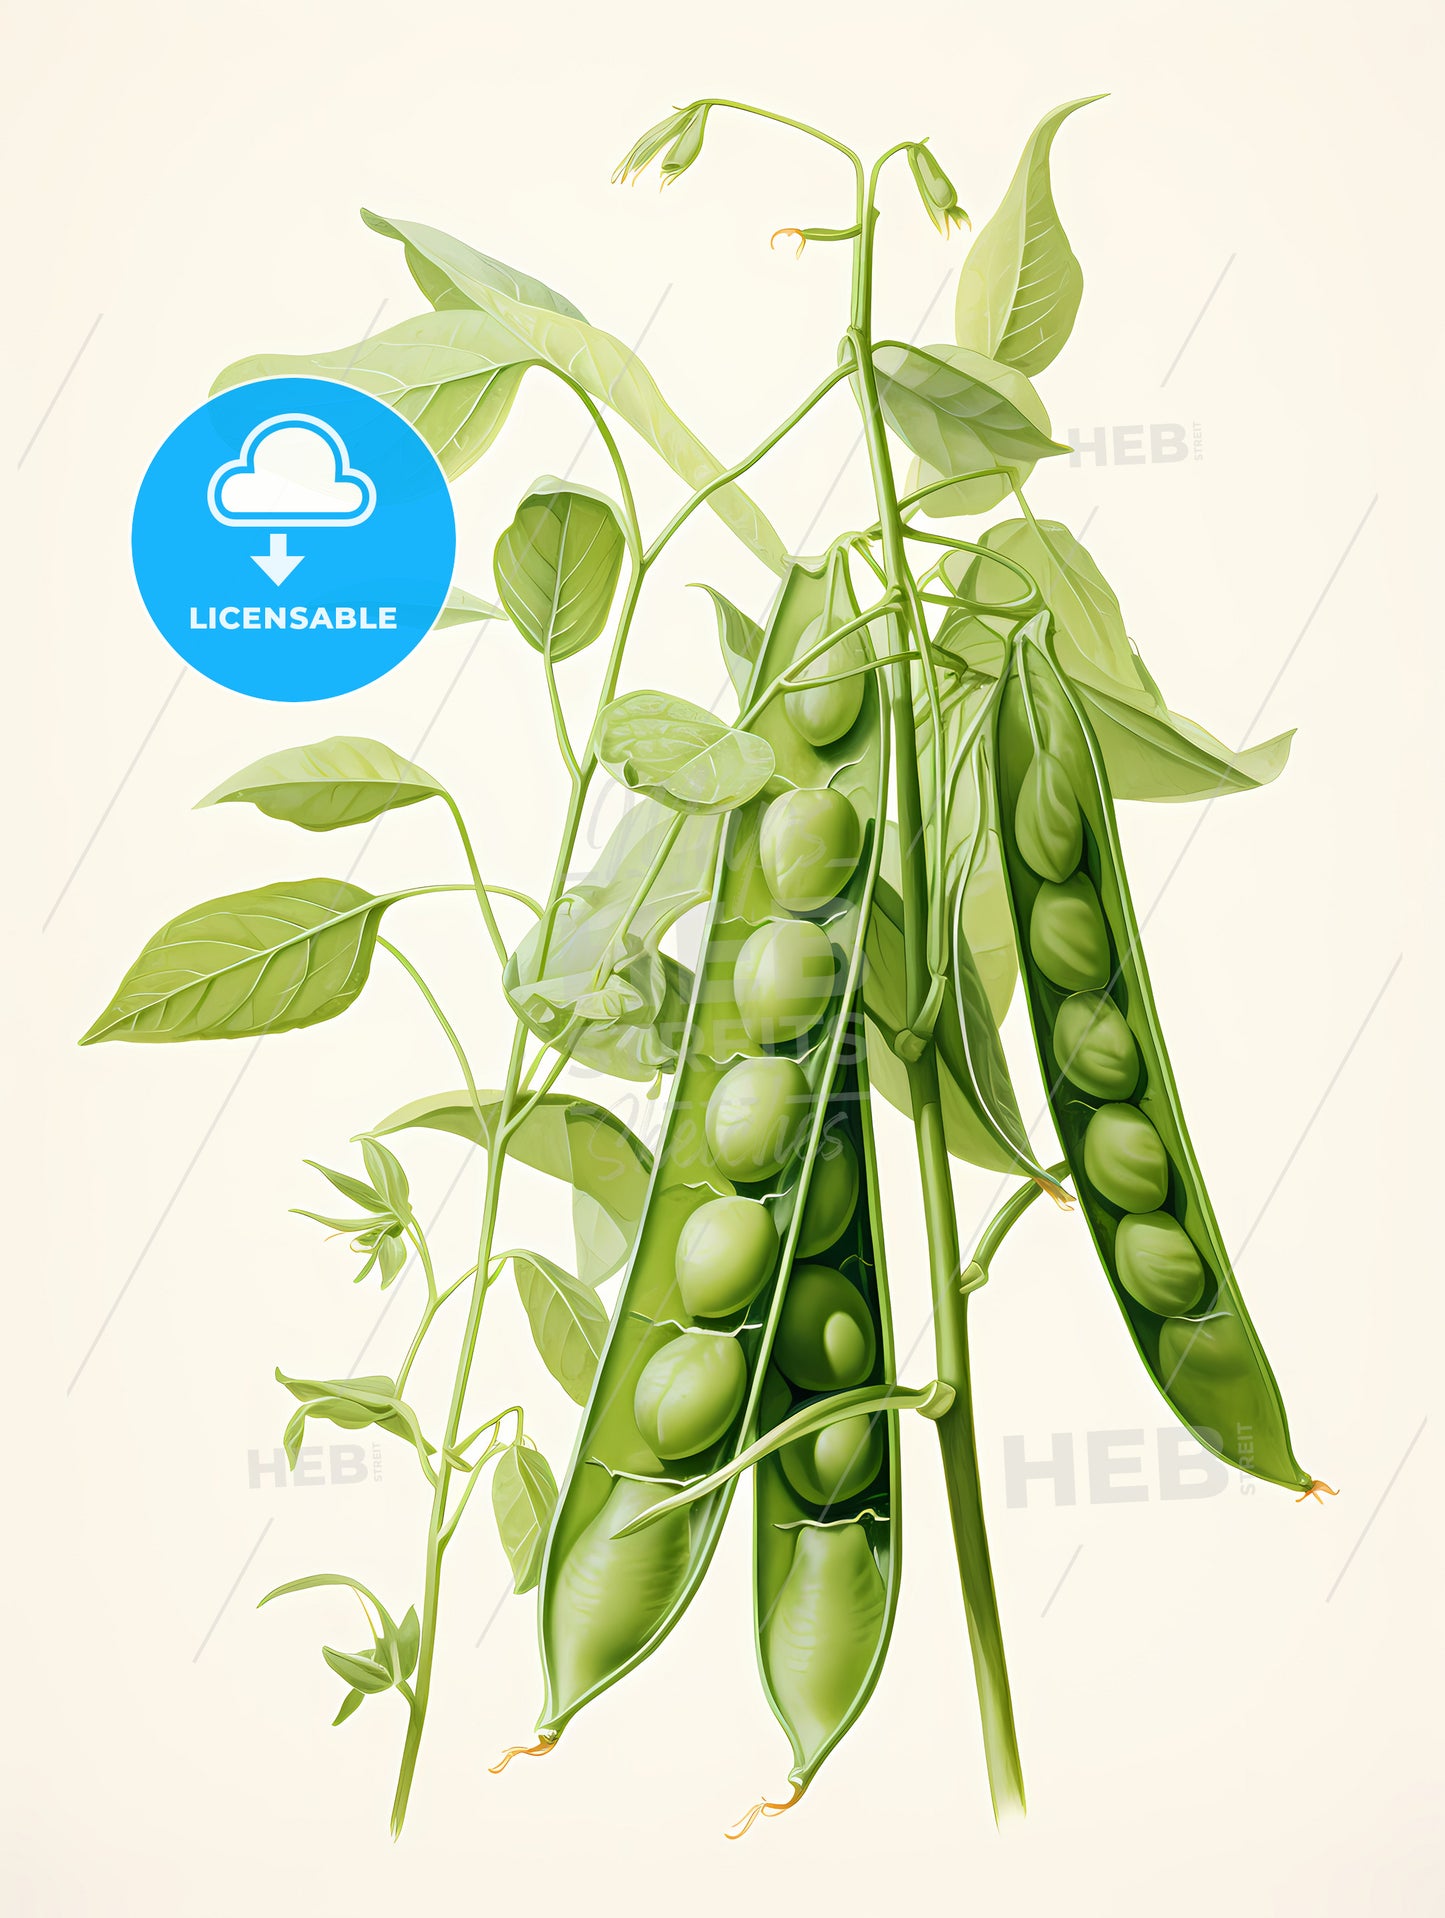 Peas - A Pea Plant With Green Leaves